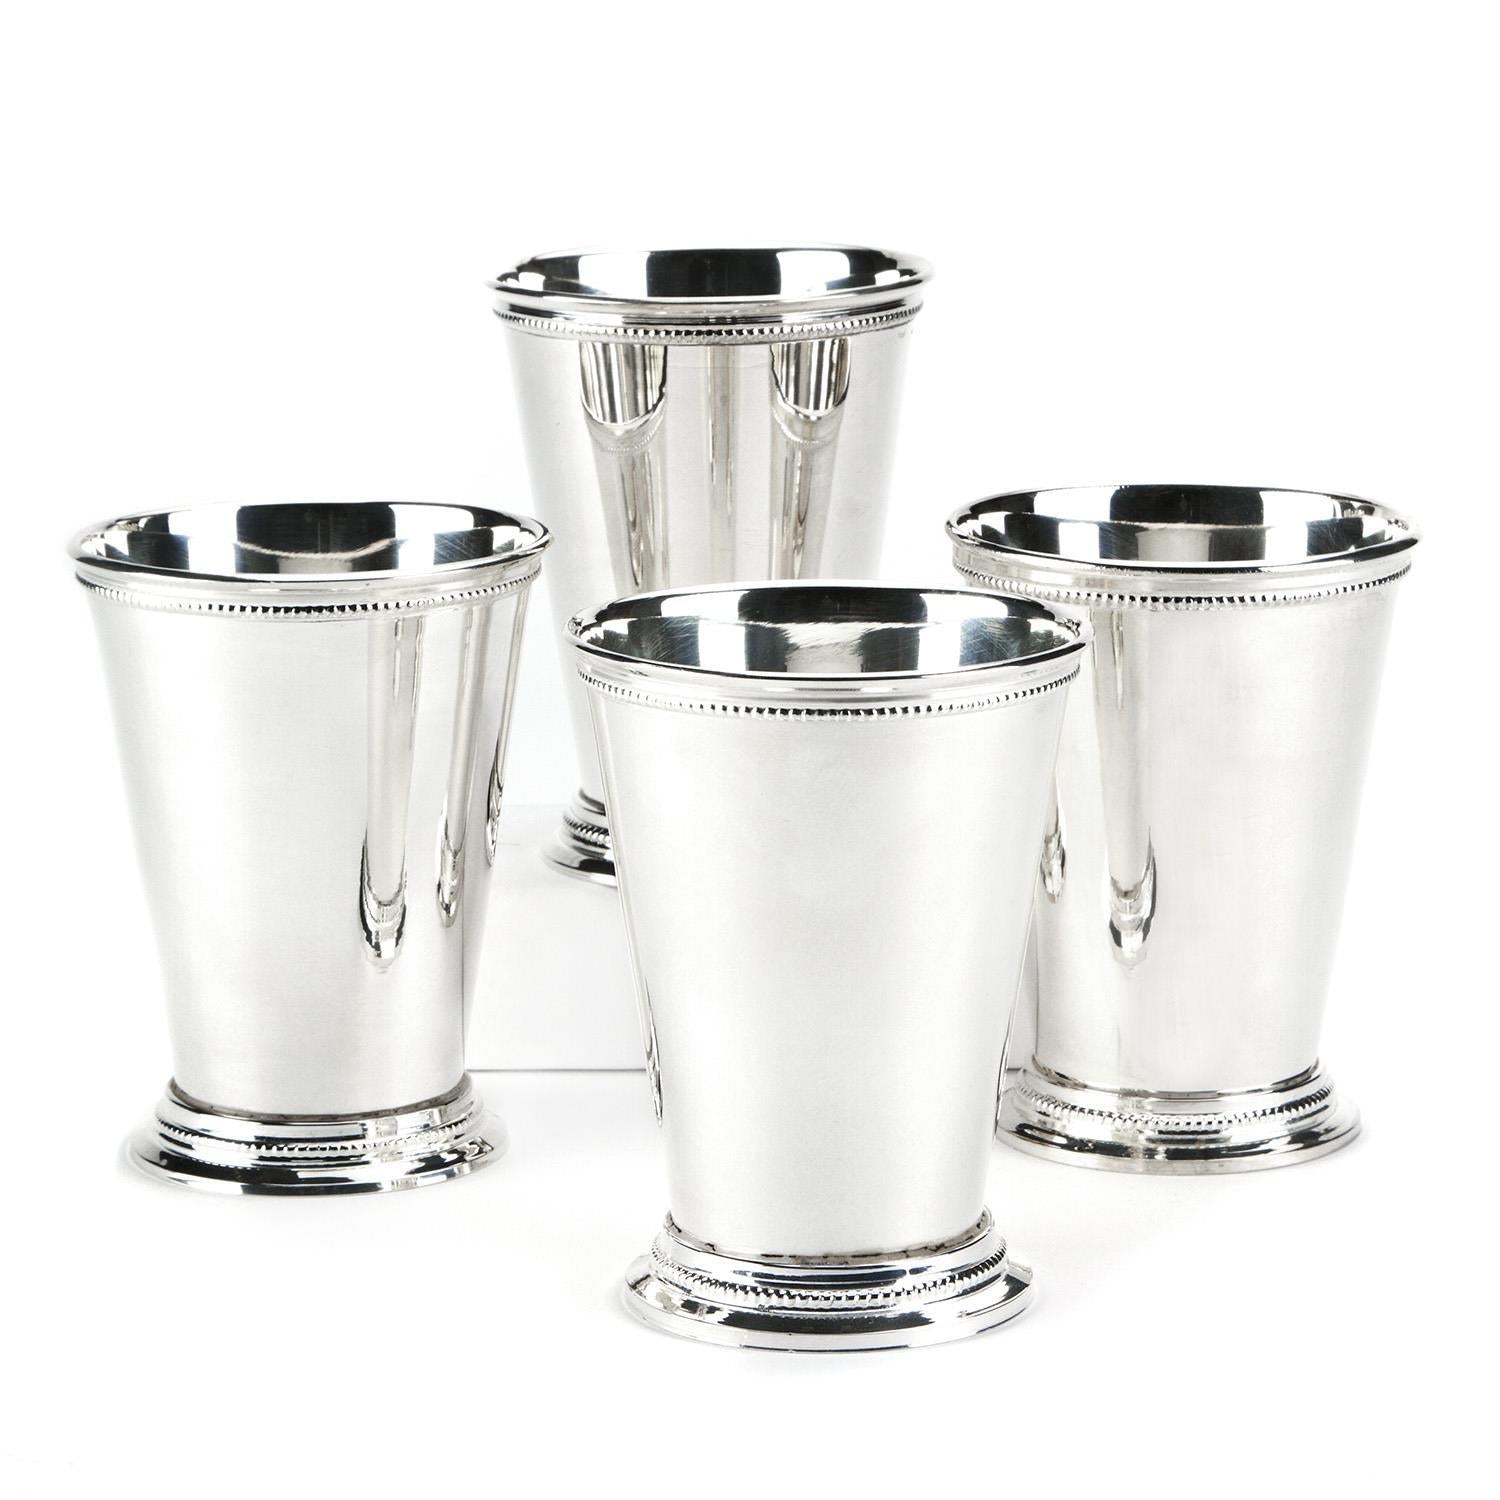 Two's Company Mint Julep Vase in Gift Box (set of 4)